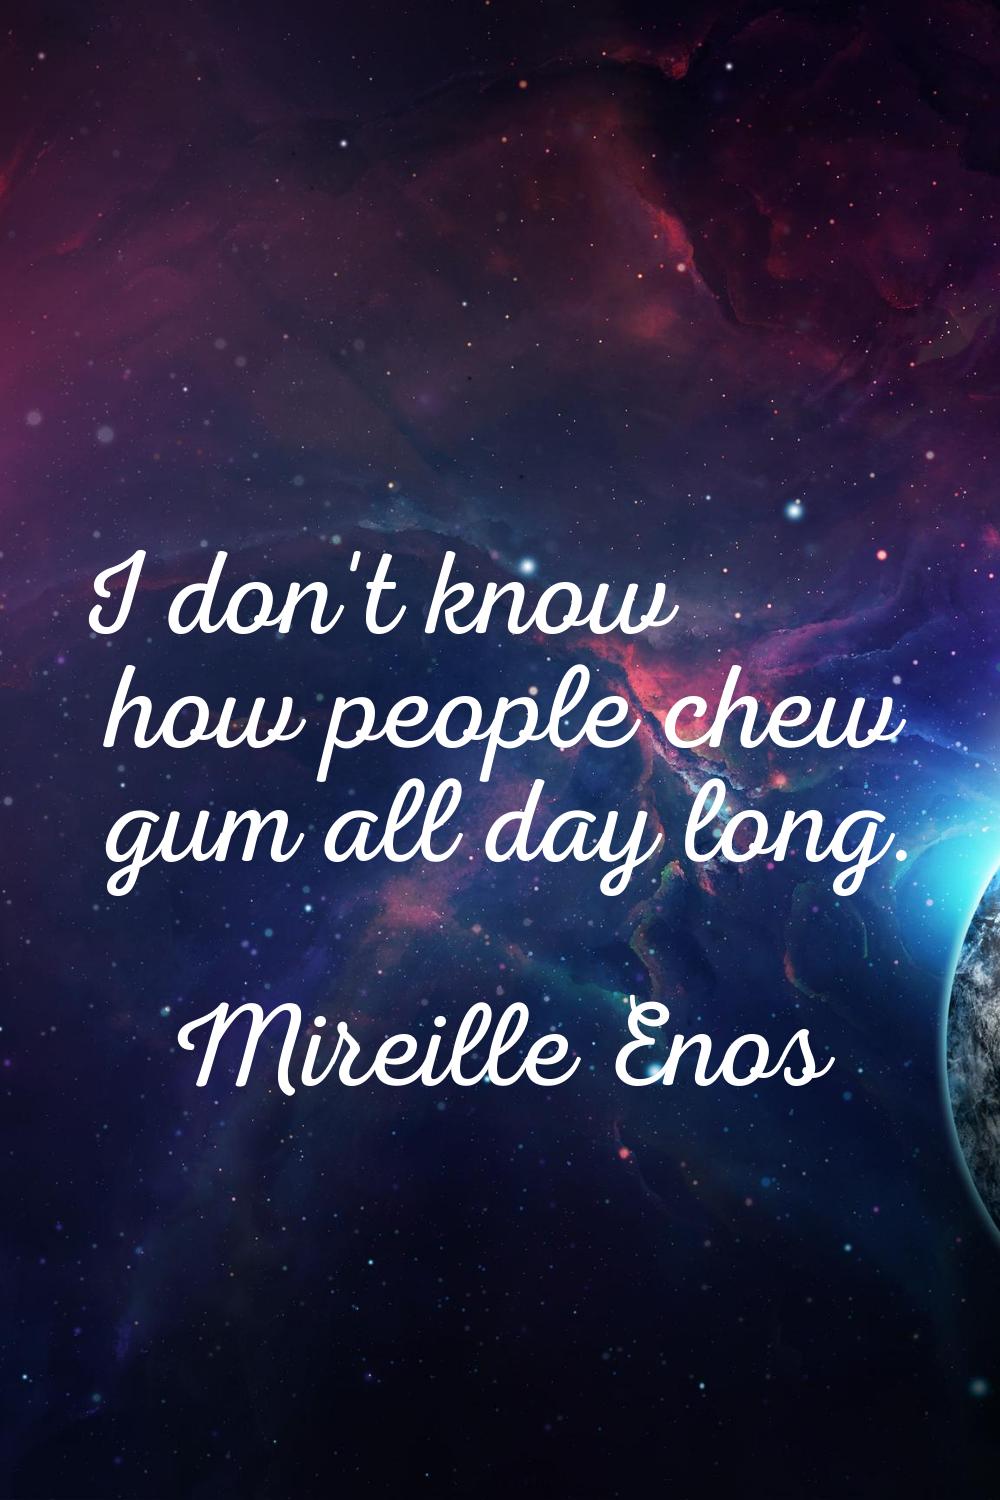 I don't know how people chew gum all day long.